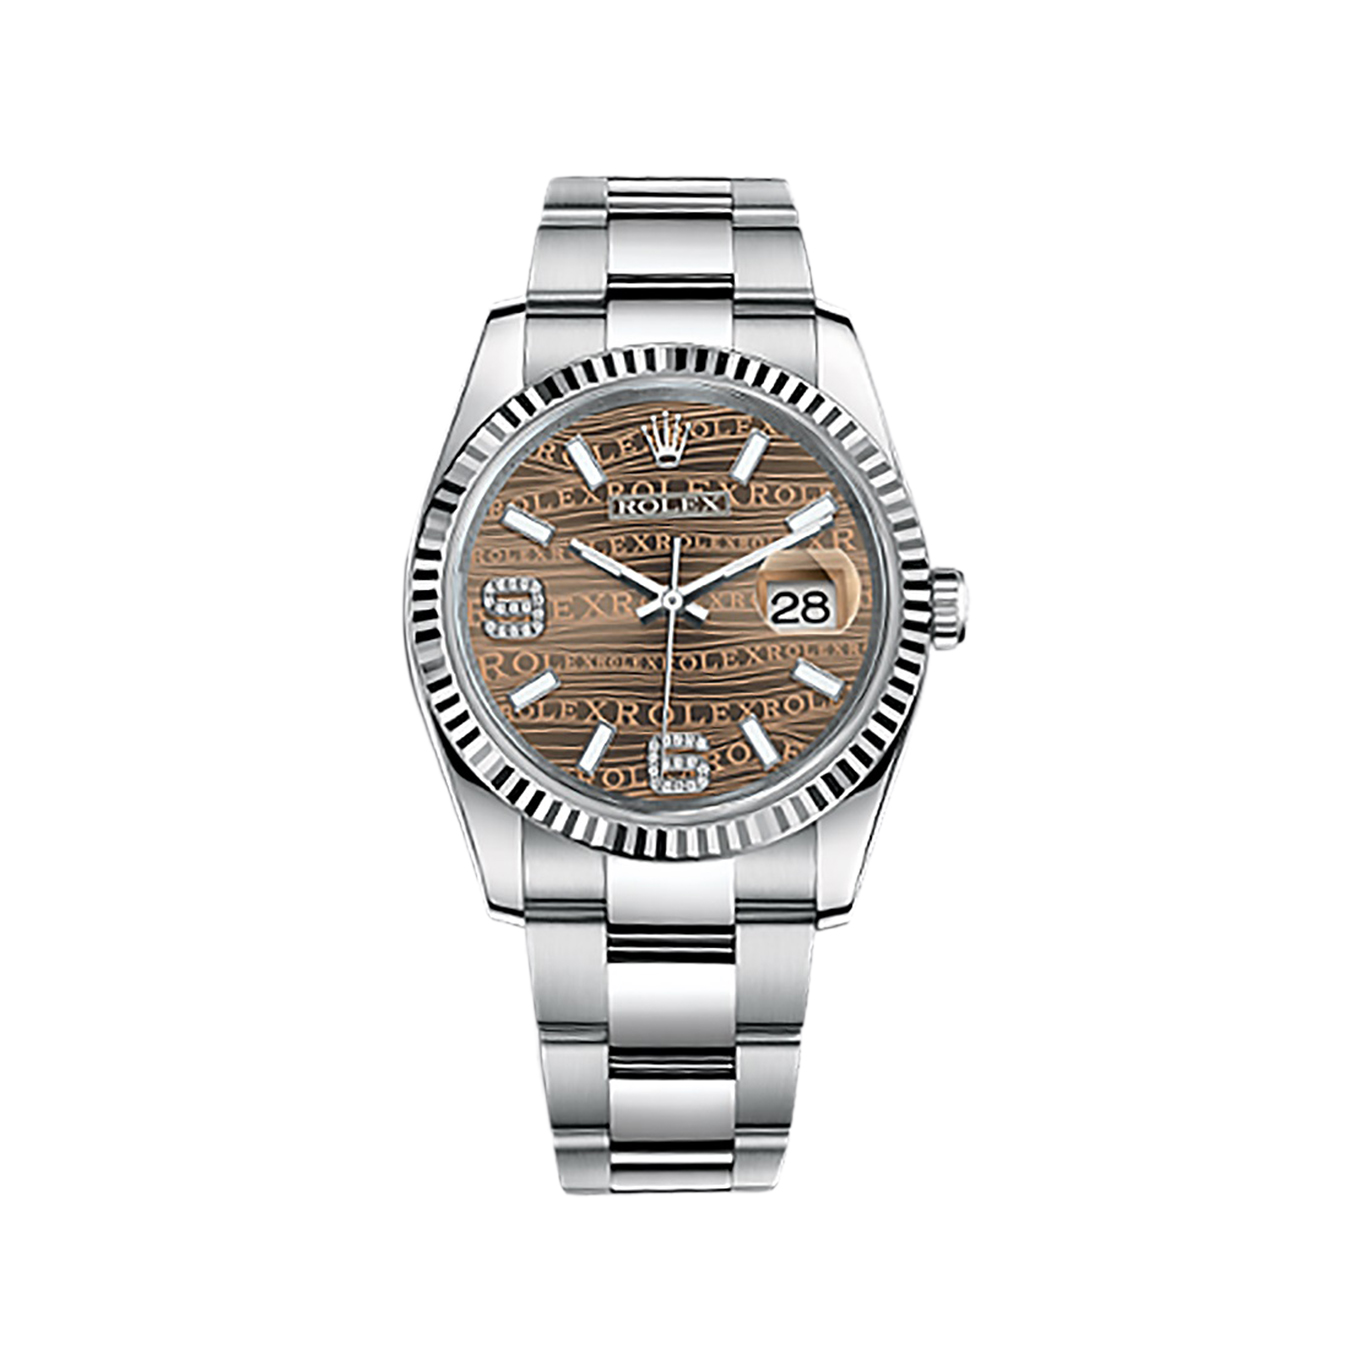 Datejust 36 116234 White Gold & Stainless Steel Watch (Bronze Waves Set with Diamonds)